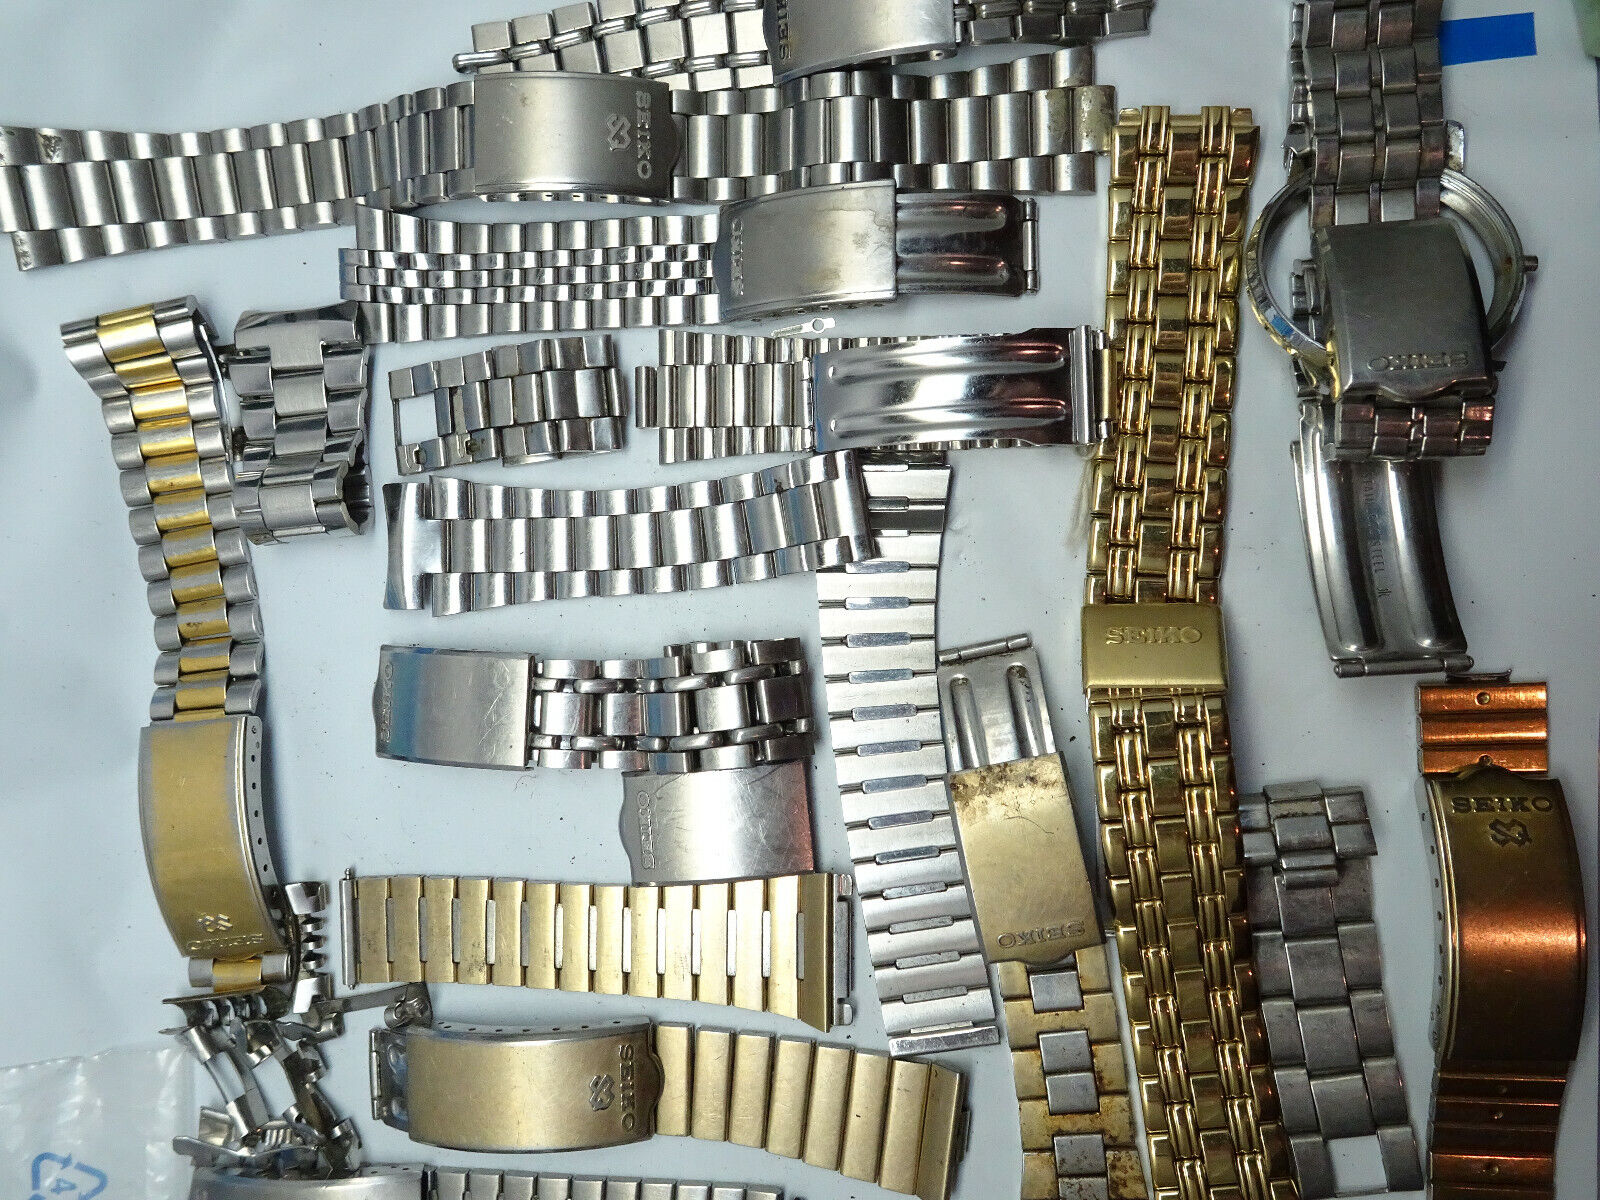 16 VINTAGE SEIKO WINDUP AND QUARTZ WATCH BANDS CLASPS PARTS FOR RESTORATIONS Seiko